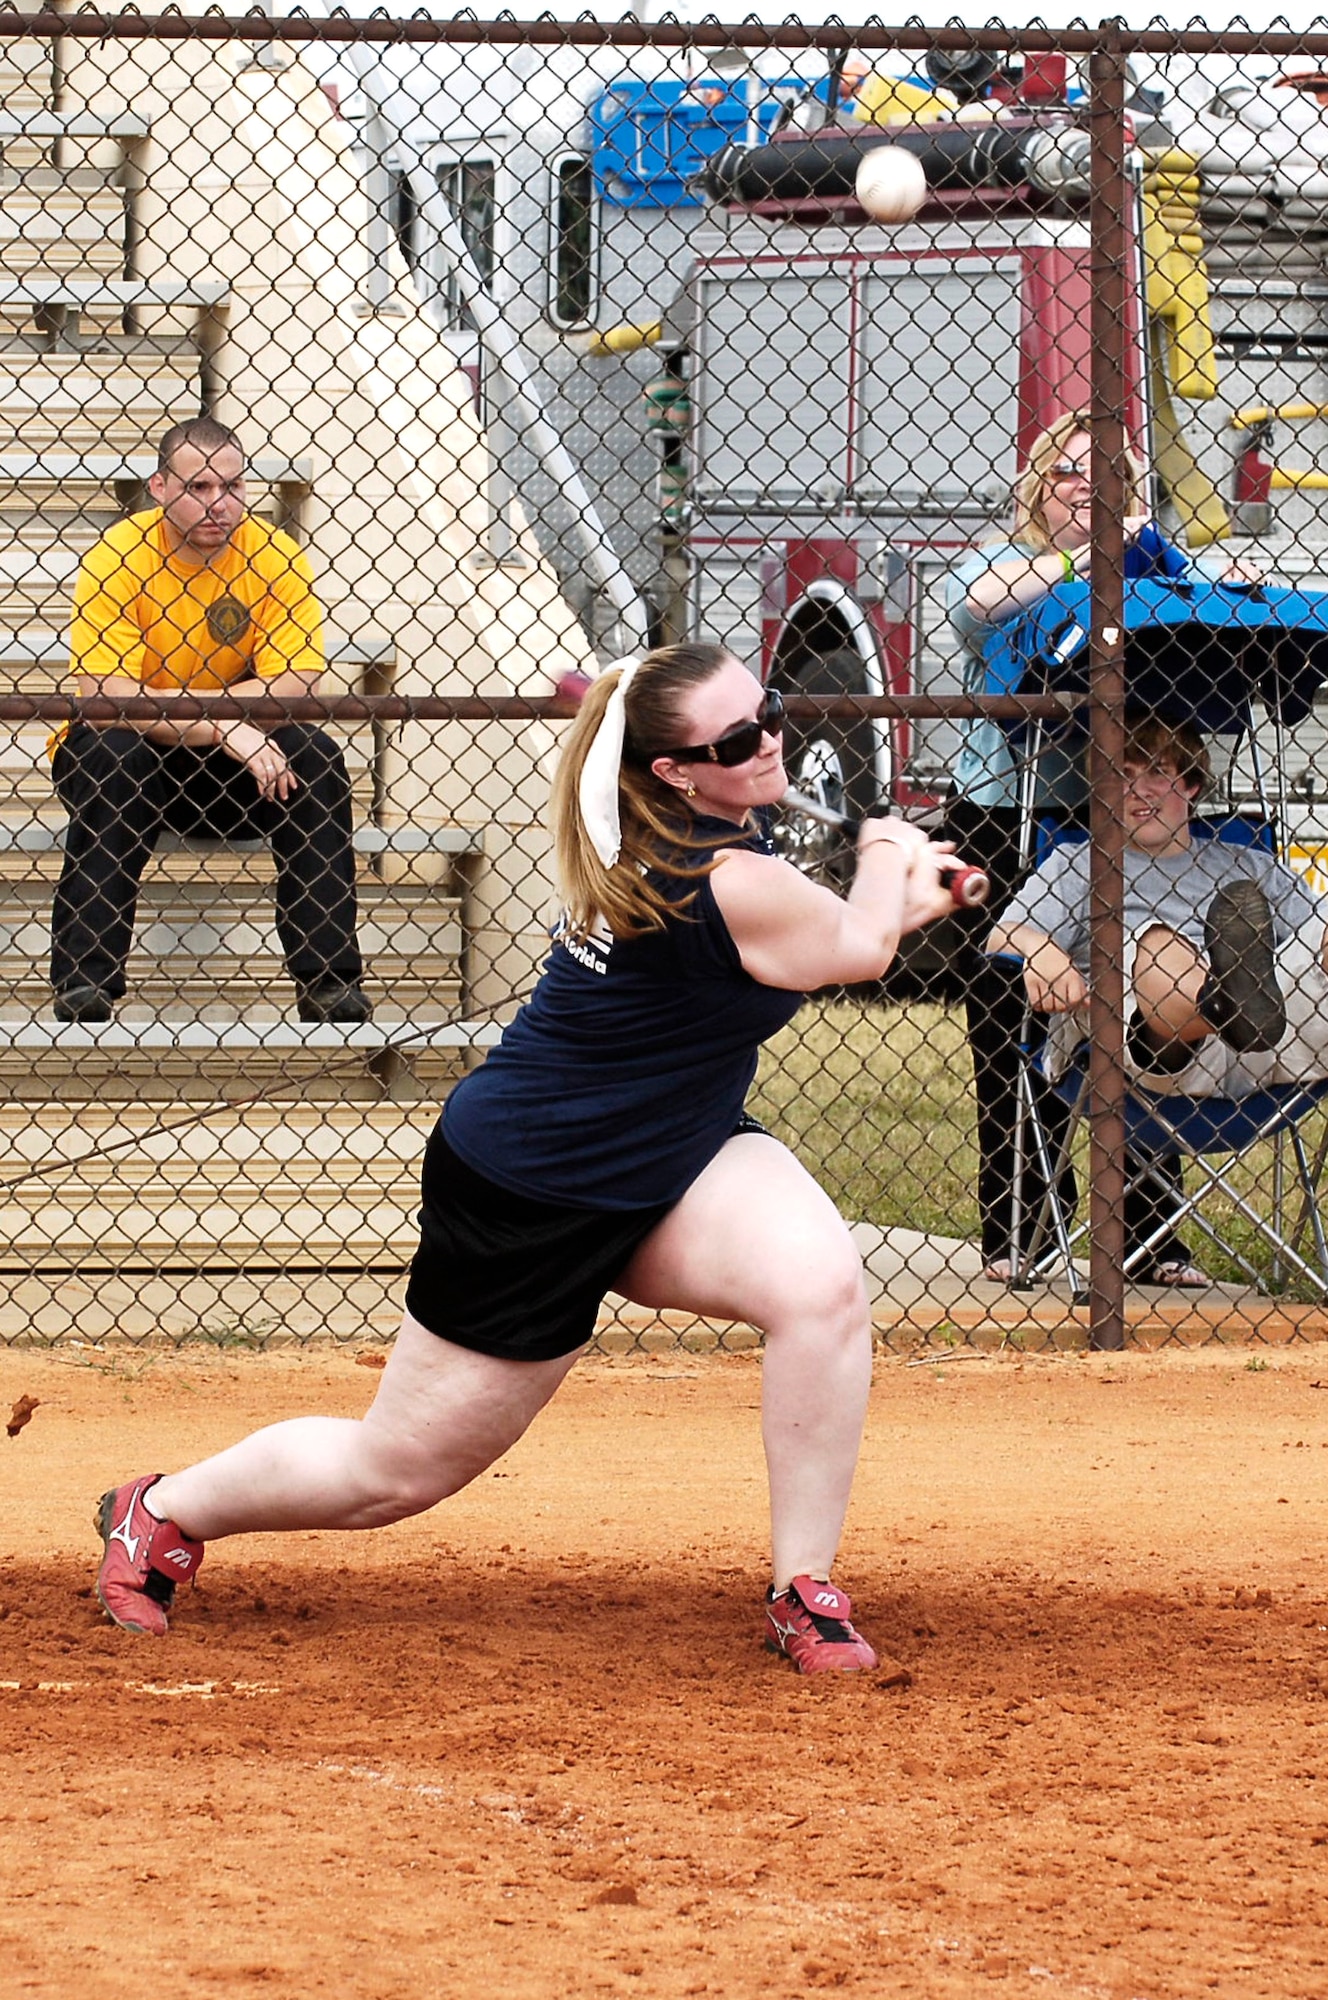 Danielle Bernt swings her bat at the ball during the softball game May 24. The tournament was held to help raise money to pay for her father's cancer treatment.(U.S. Air Force photoby Senior Airman Bradley) 